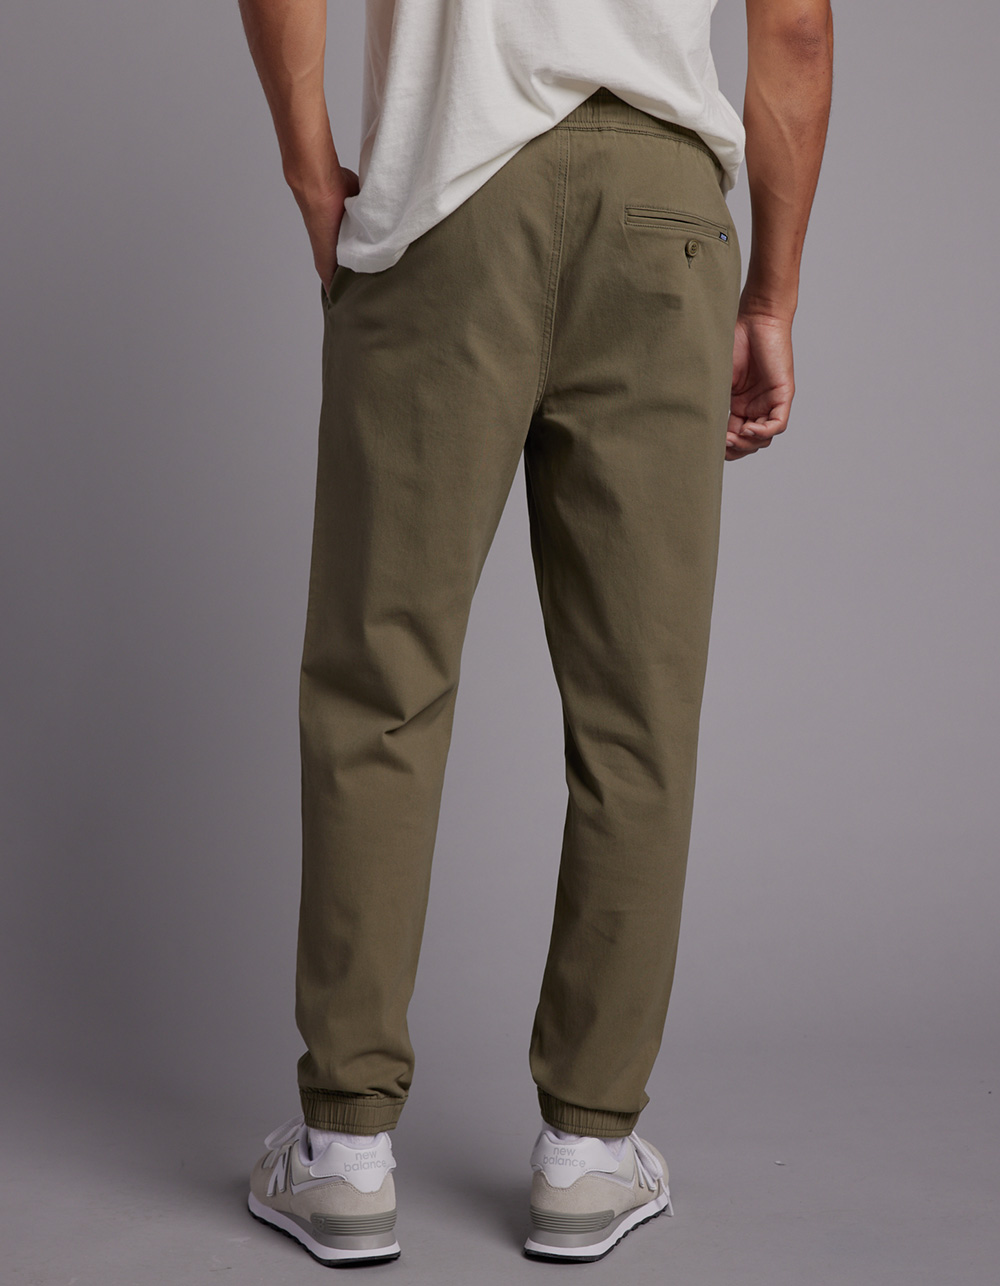 RSQ Mens Twill Jogger Pants - ARMY